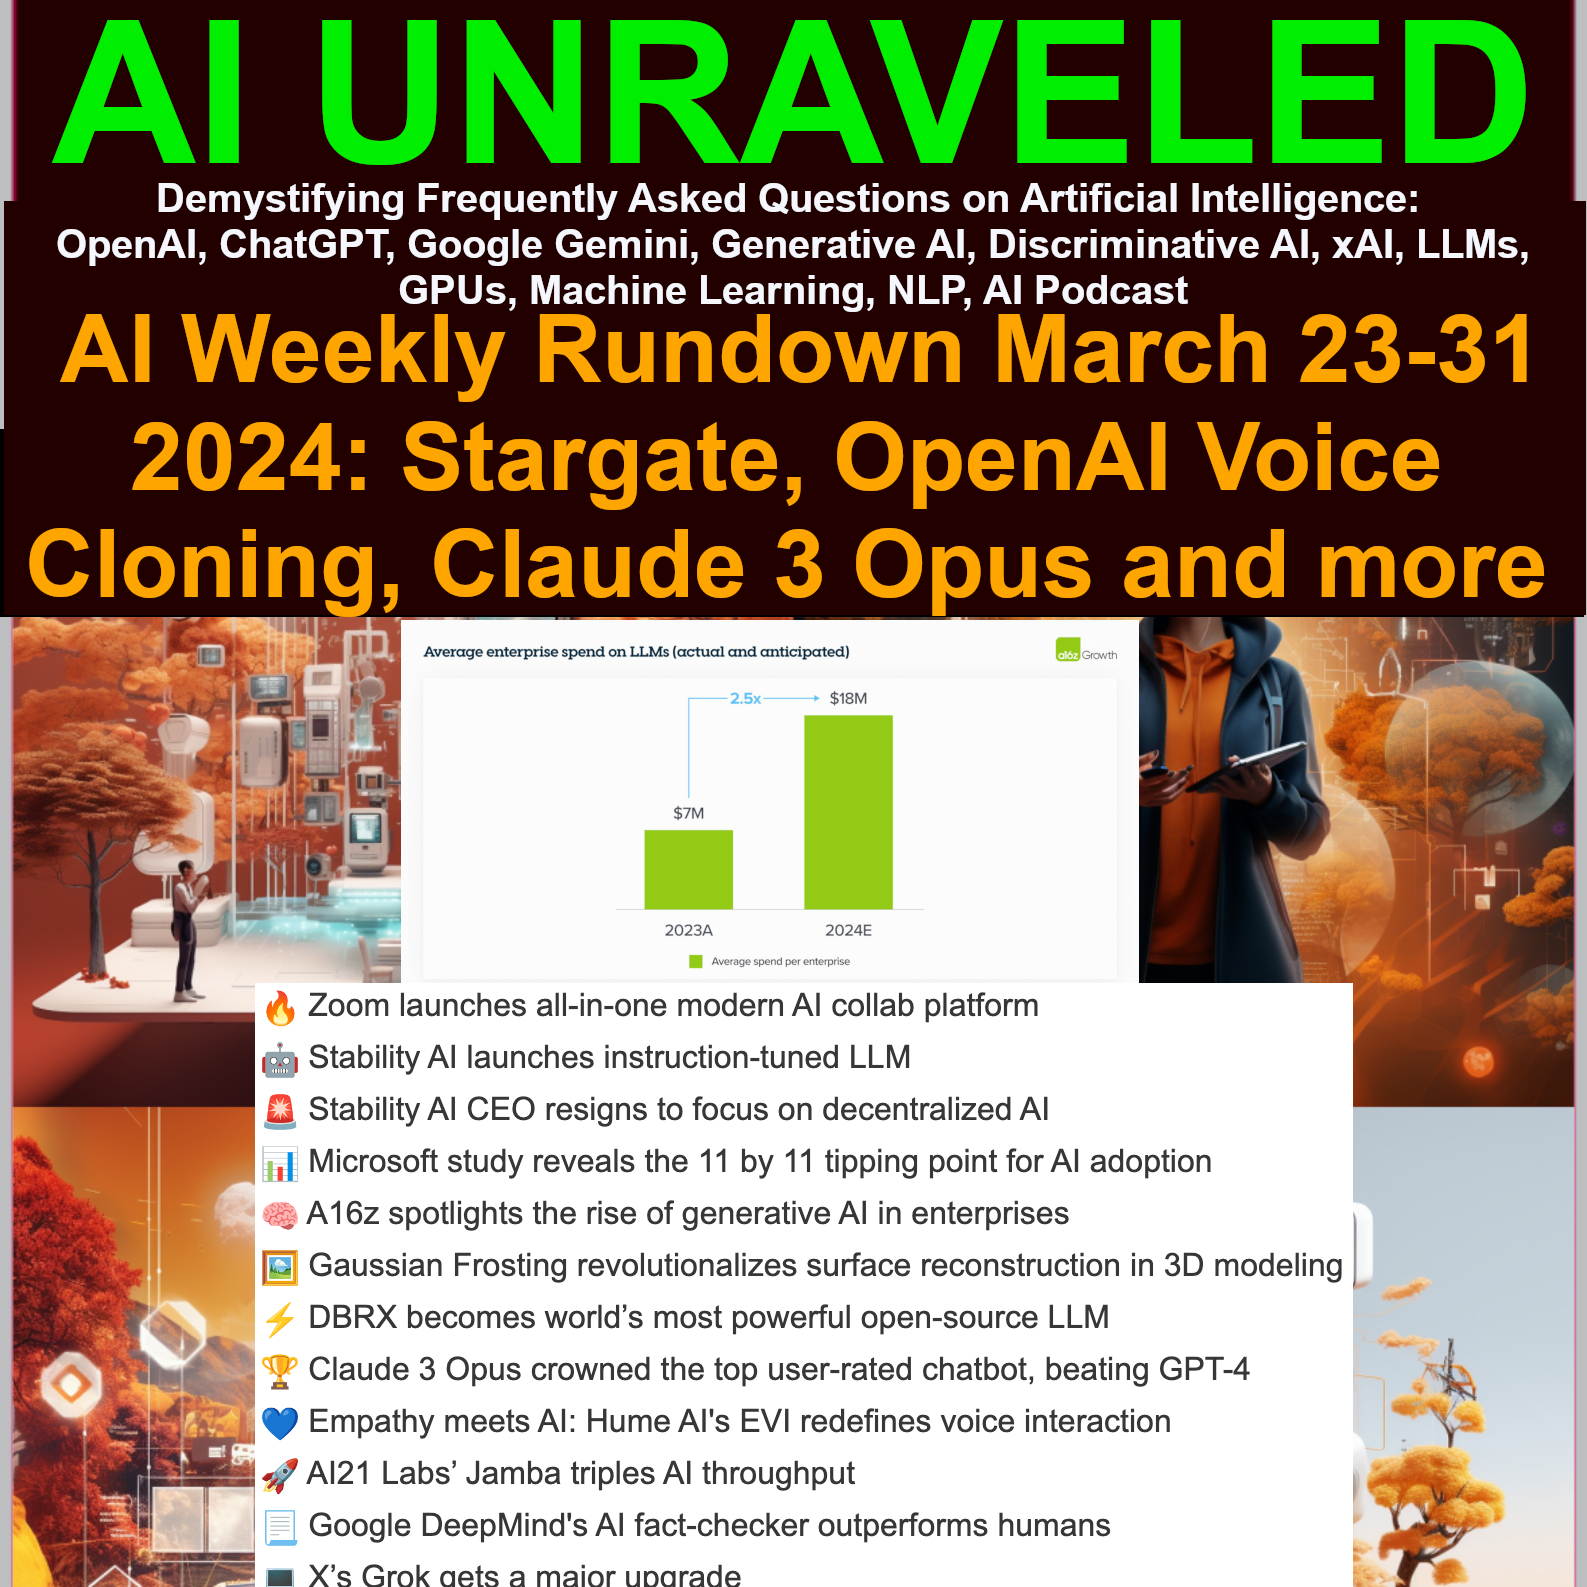 AI Weekly Rundown (March 23 to March 31 2024) Major AI announcements from OpenAI, Zoom, Microsoft, Anthropic, DeepMind and more.